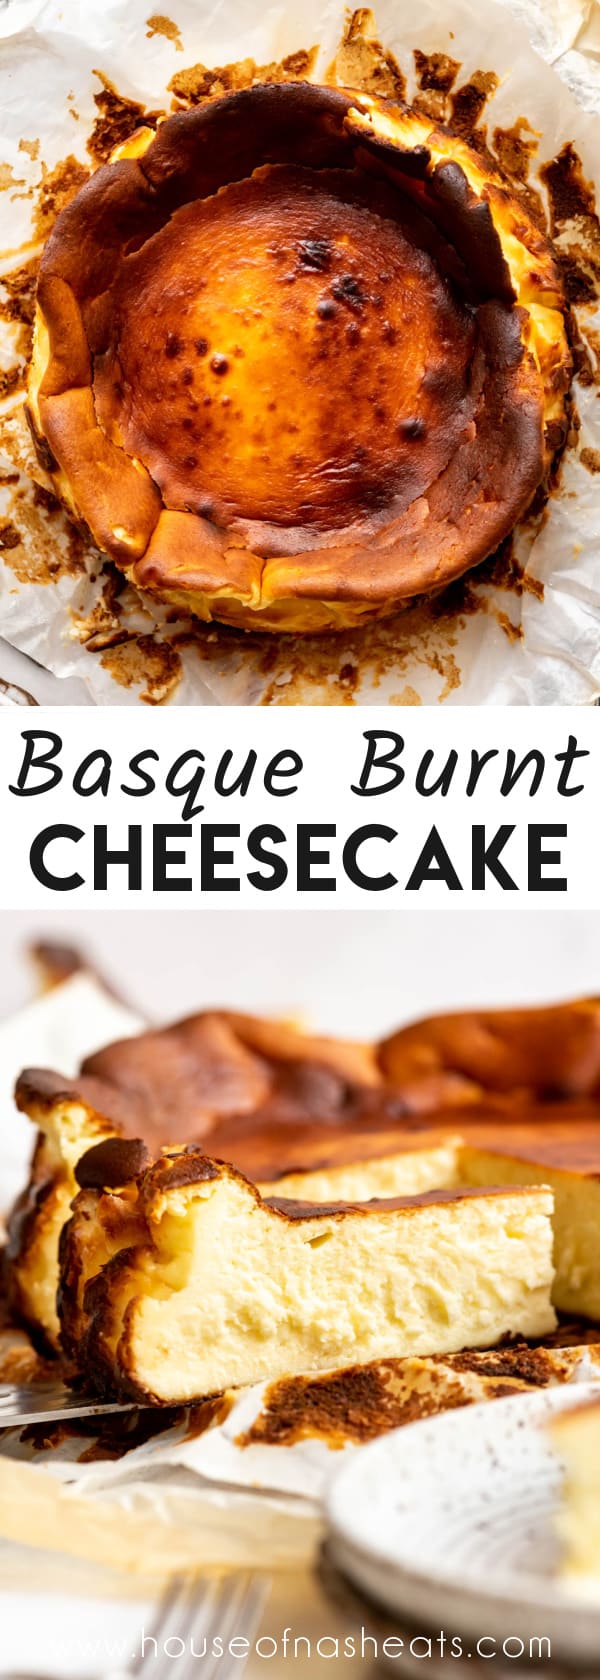 A collage of images of Basque burnt cheesecake with text overlay.